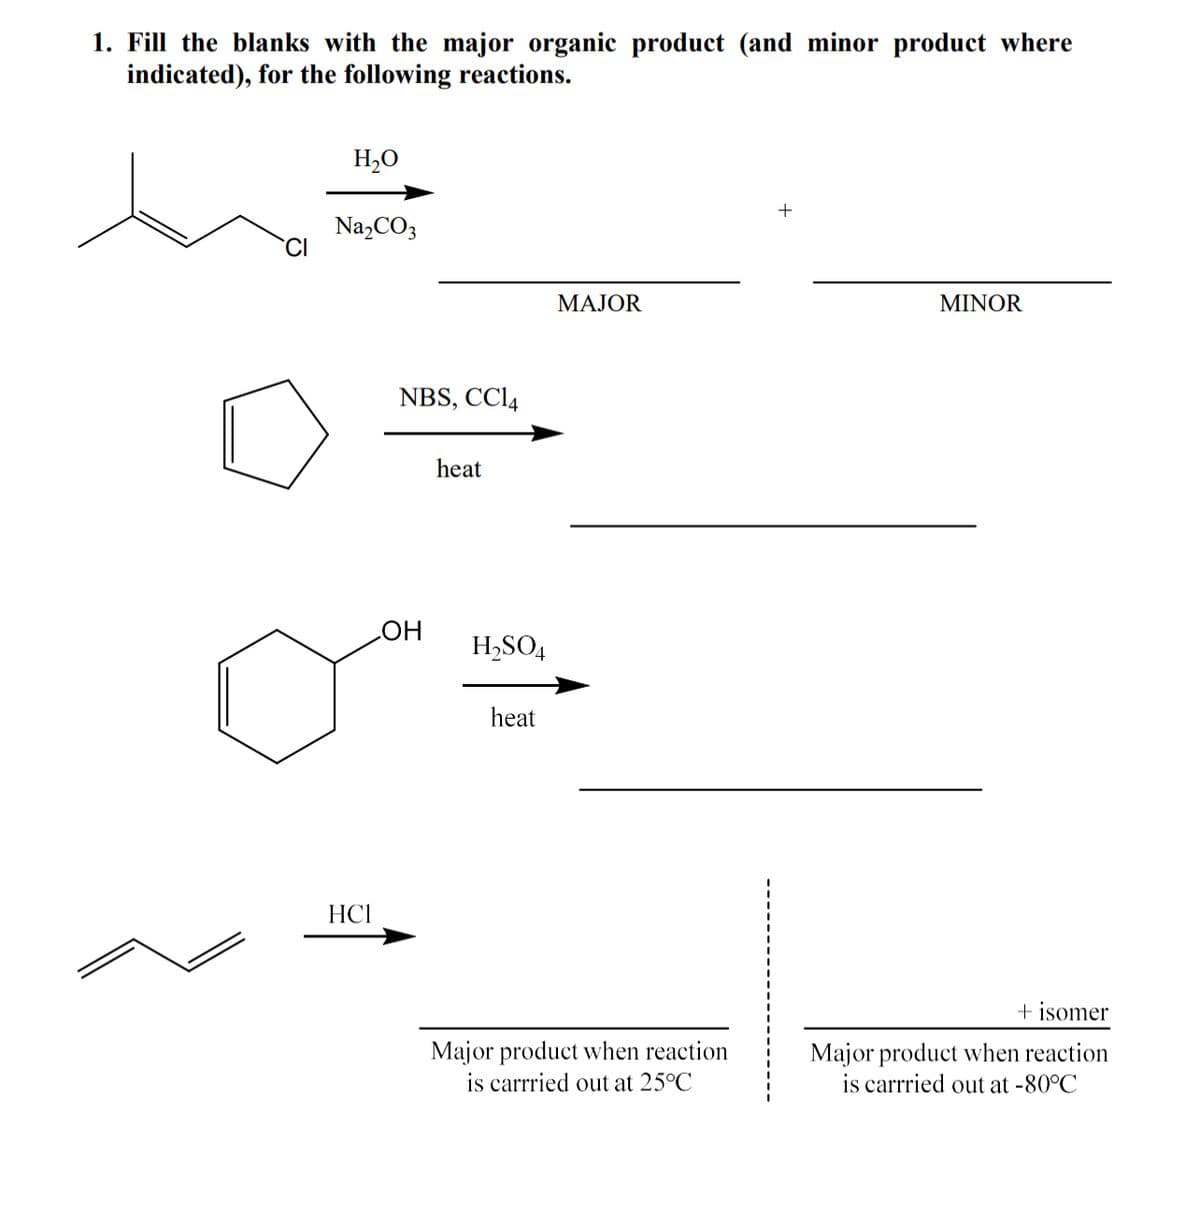 1. Fill the blanks with the major organic product (and minor product where
indicated), for the following reactions.
H,O
+
Na,CO3
МАЈOR
MINOR
NBS, CCI4
heat
HO
H,SO4
heat
HCI
+ isomer
Major product when reaction
is carrried out at -80°C
Major product when reaction
is carrried out at 25°C
